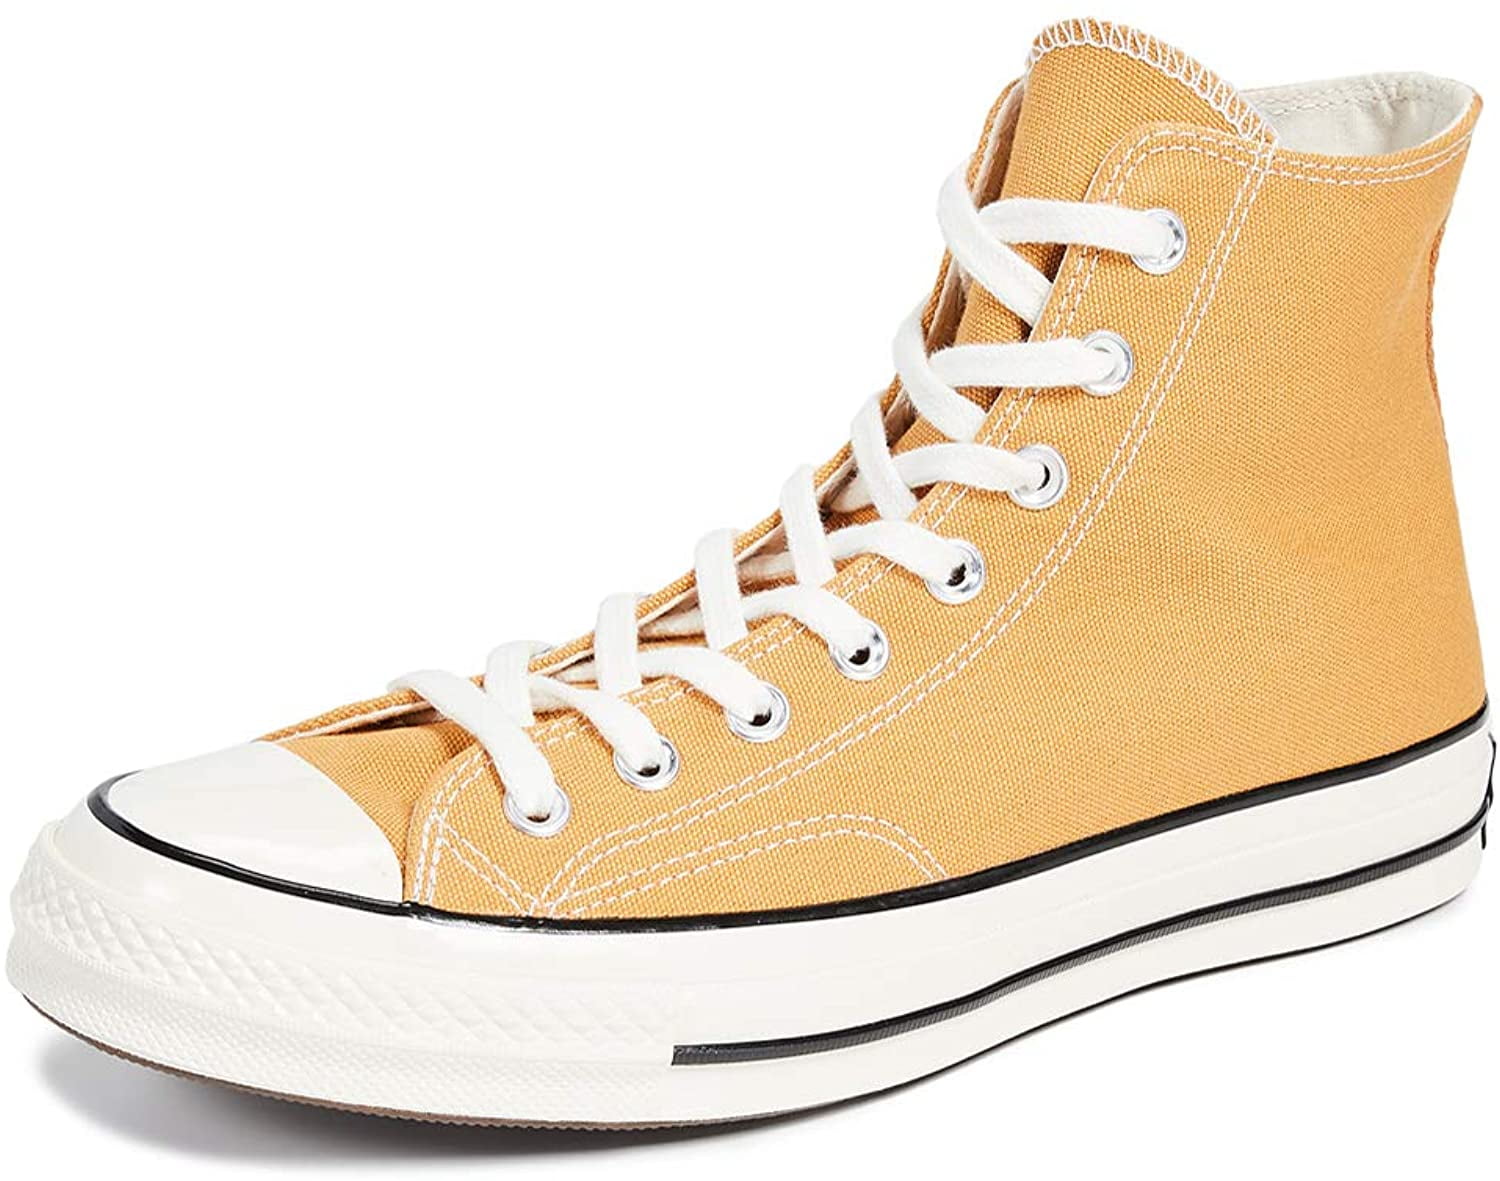 Converse All Star Bb Shift Gold Detail (Beige Size 9.5) Unisex Shoes